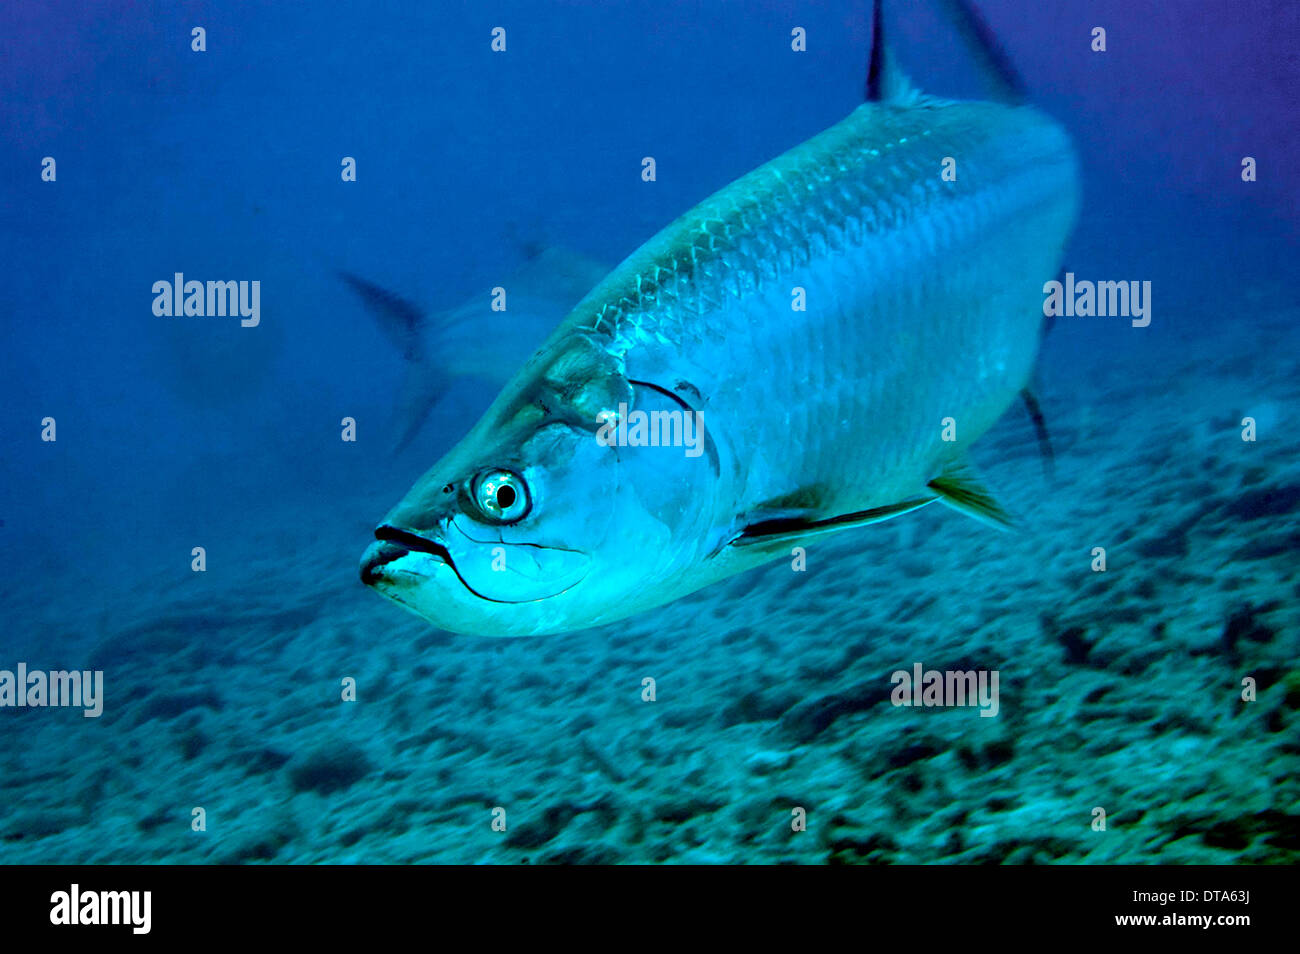 close view of fish approaching at speed above coral rubble and turning to left. Stock Photo